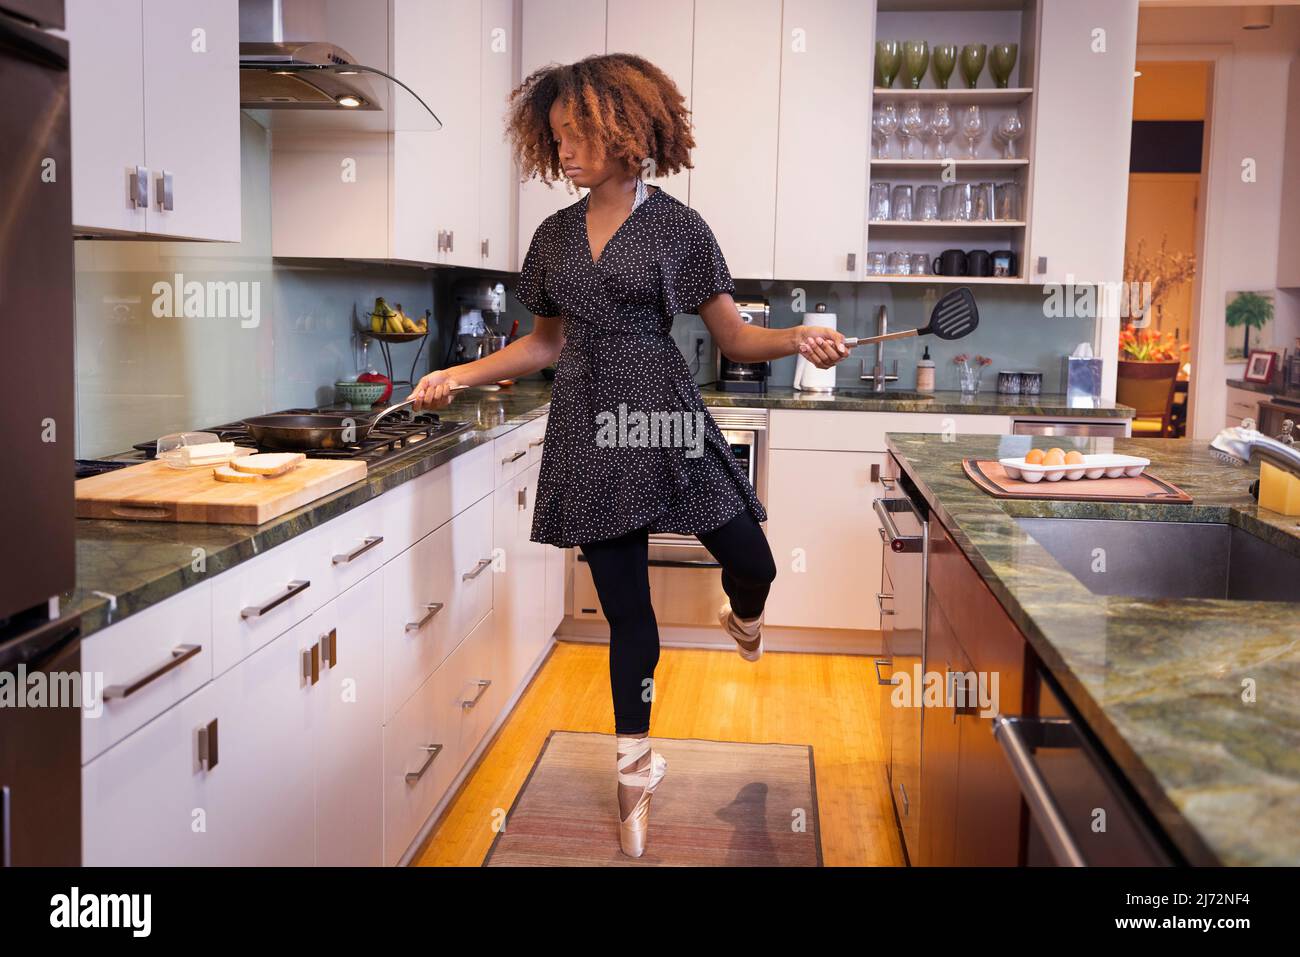 Ballet dancer cooking in a residential kitchen Stock Photo